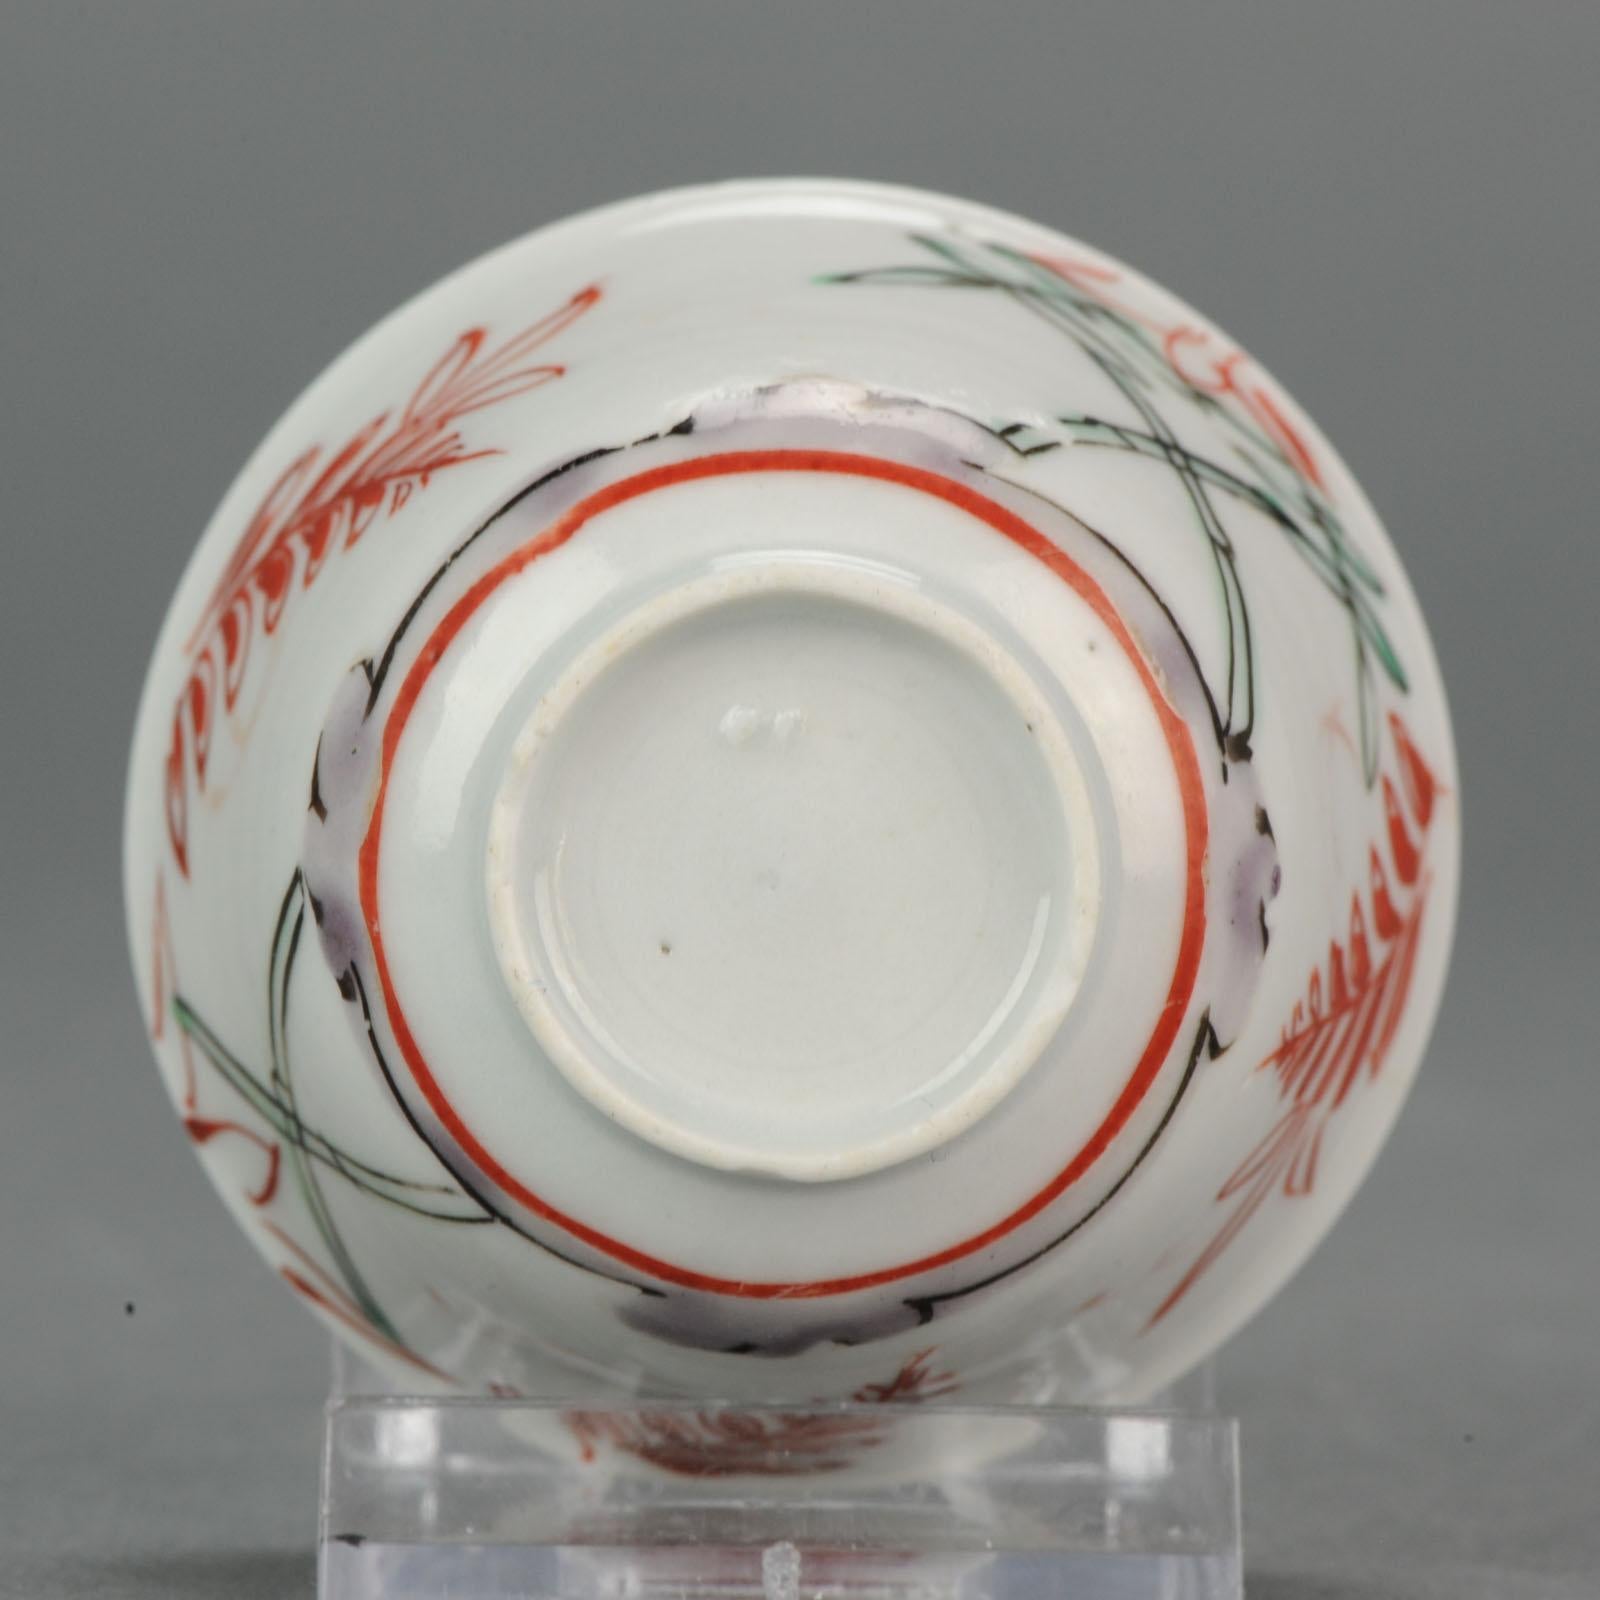 Antique Japanese Porcelain Tea Bowls Arita, 18th Century In Good Condition For Sale In Amsterdam, Noord Holland